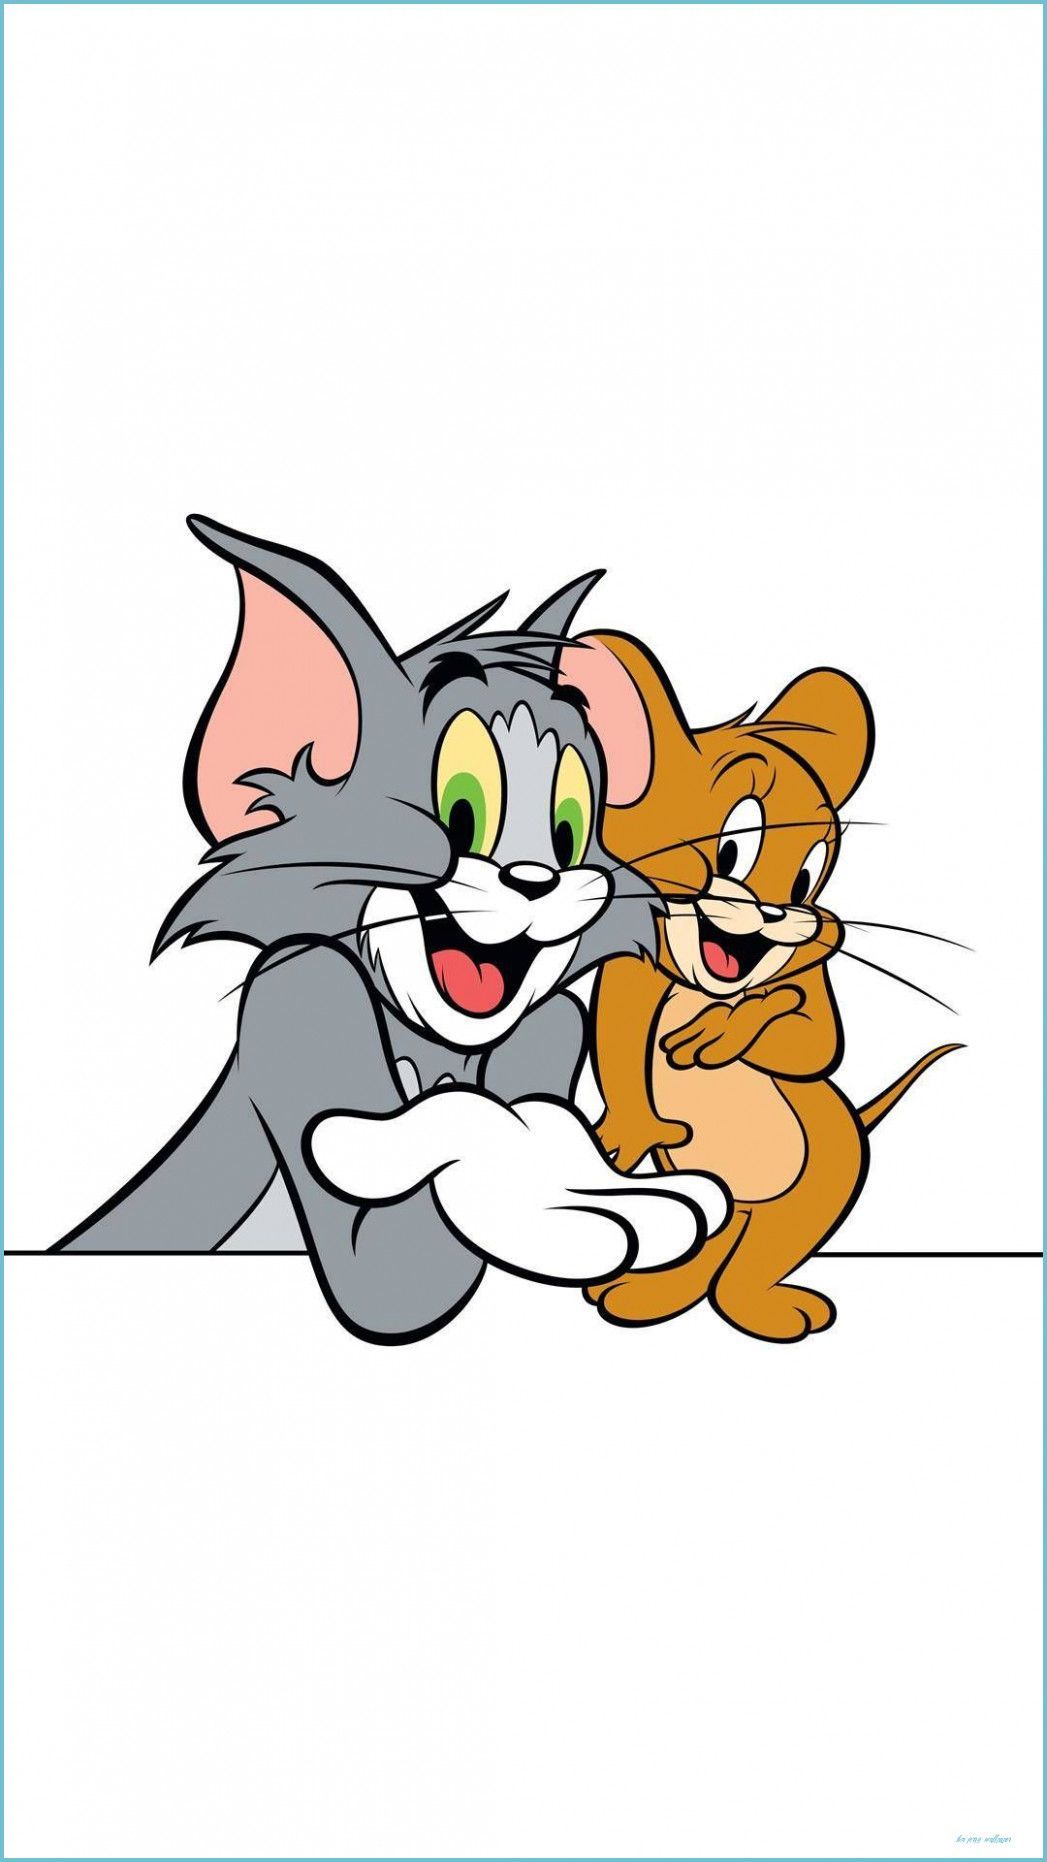 Tom and jerry wallpaper for android phone - Tom and Jerry